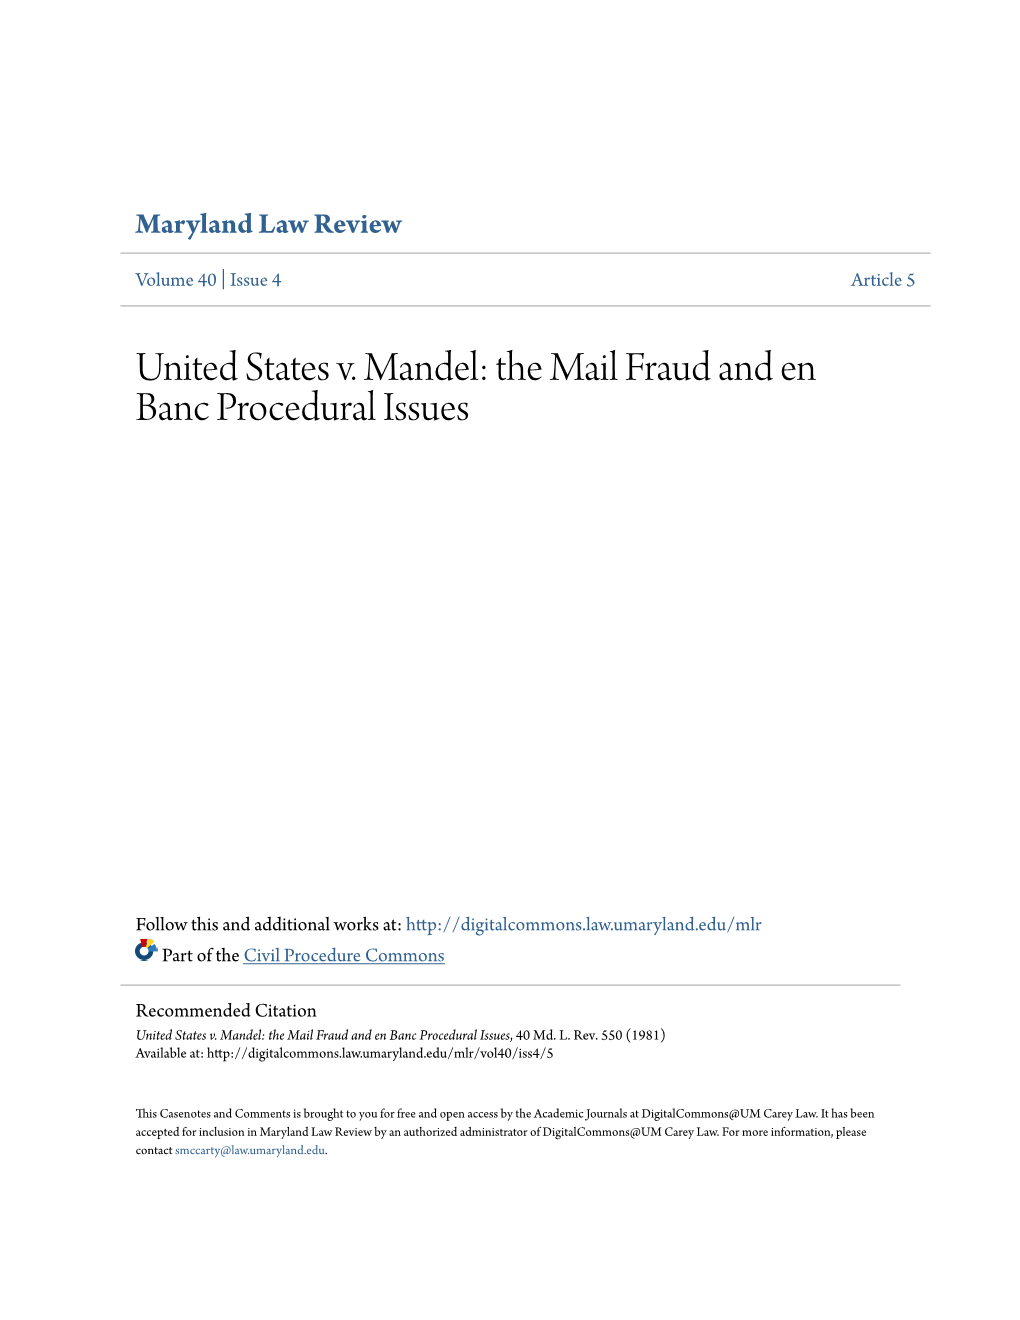 United States V. Mandel: the Mail Fraud and En Banc Procedural Issues